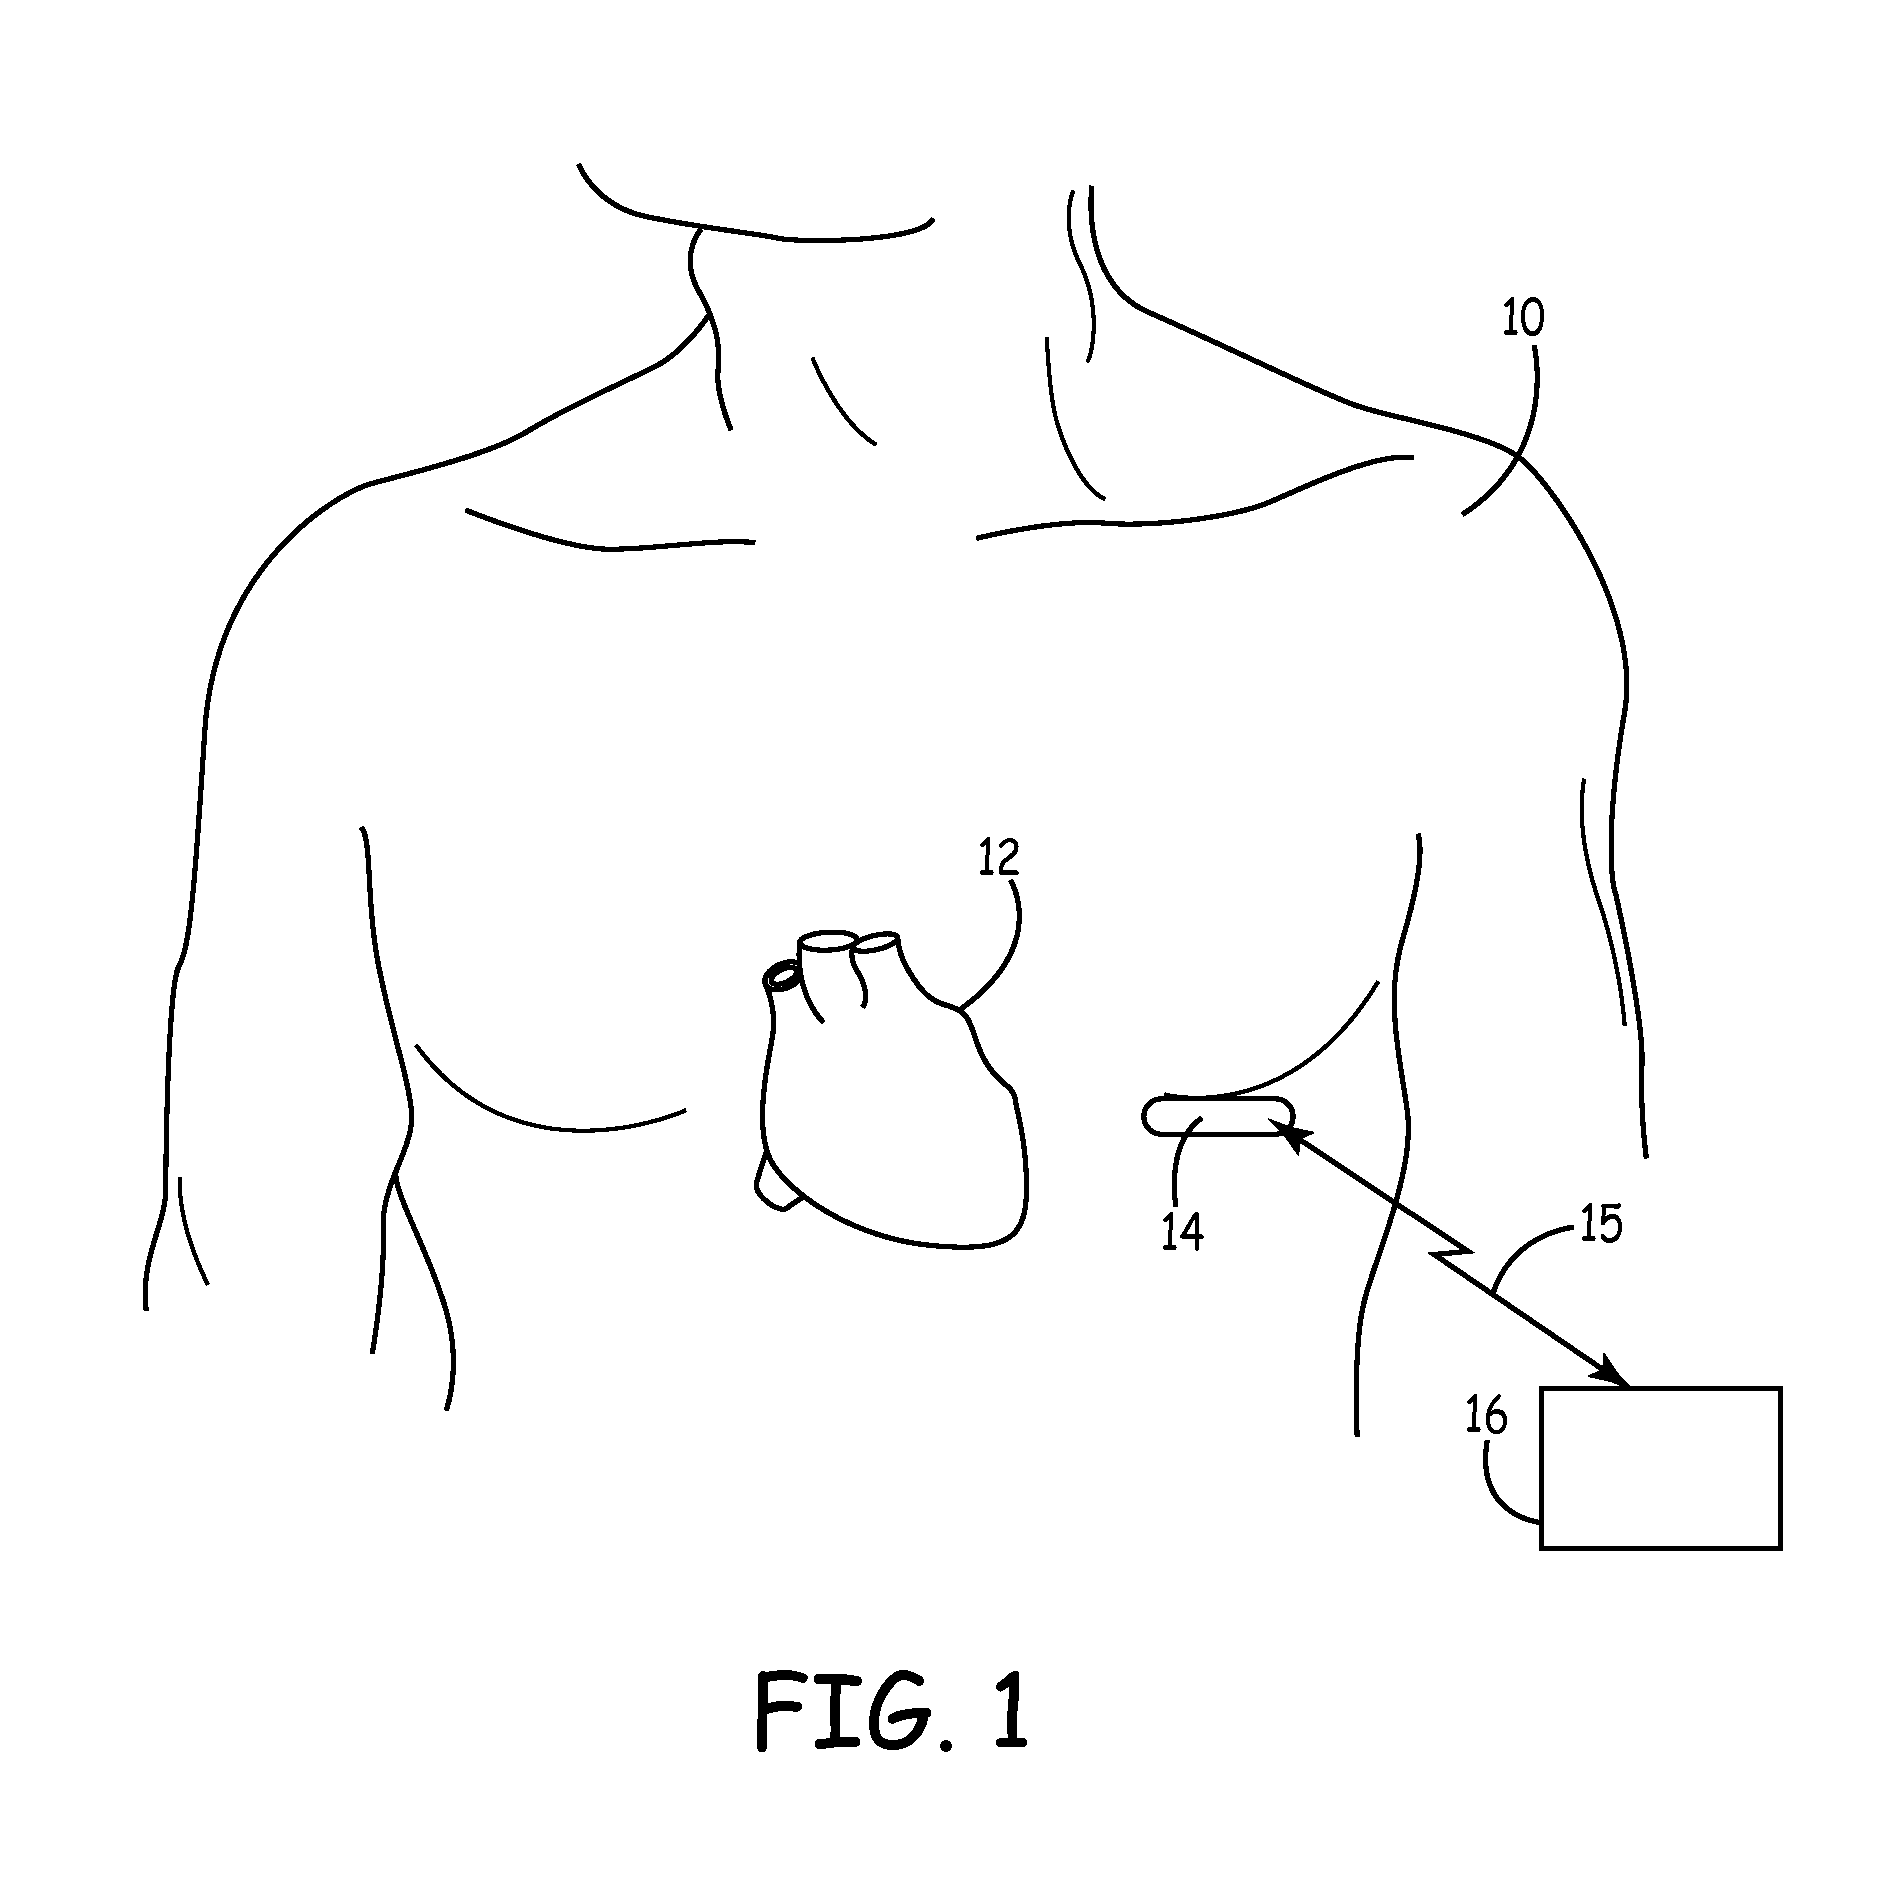 Tools and method for implanting a subcutaneous device